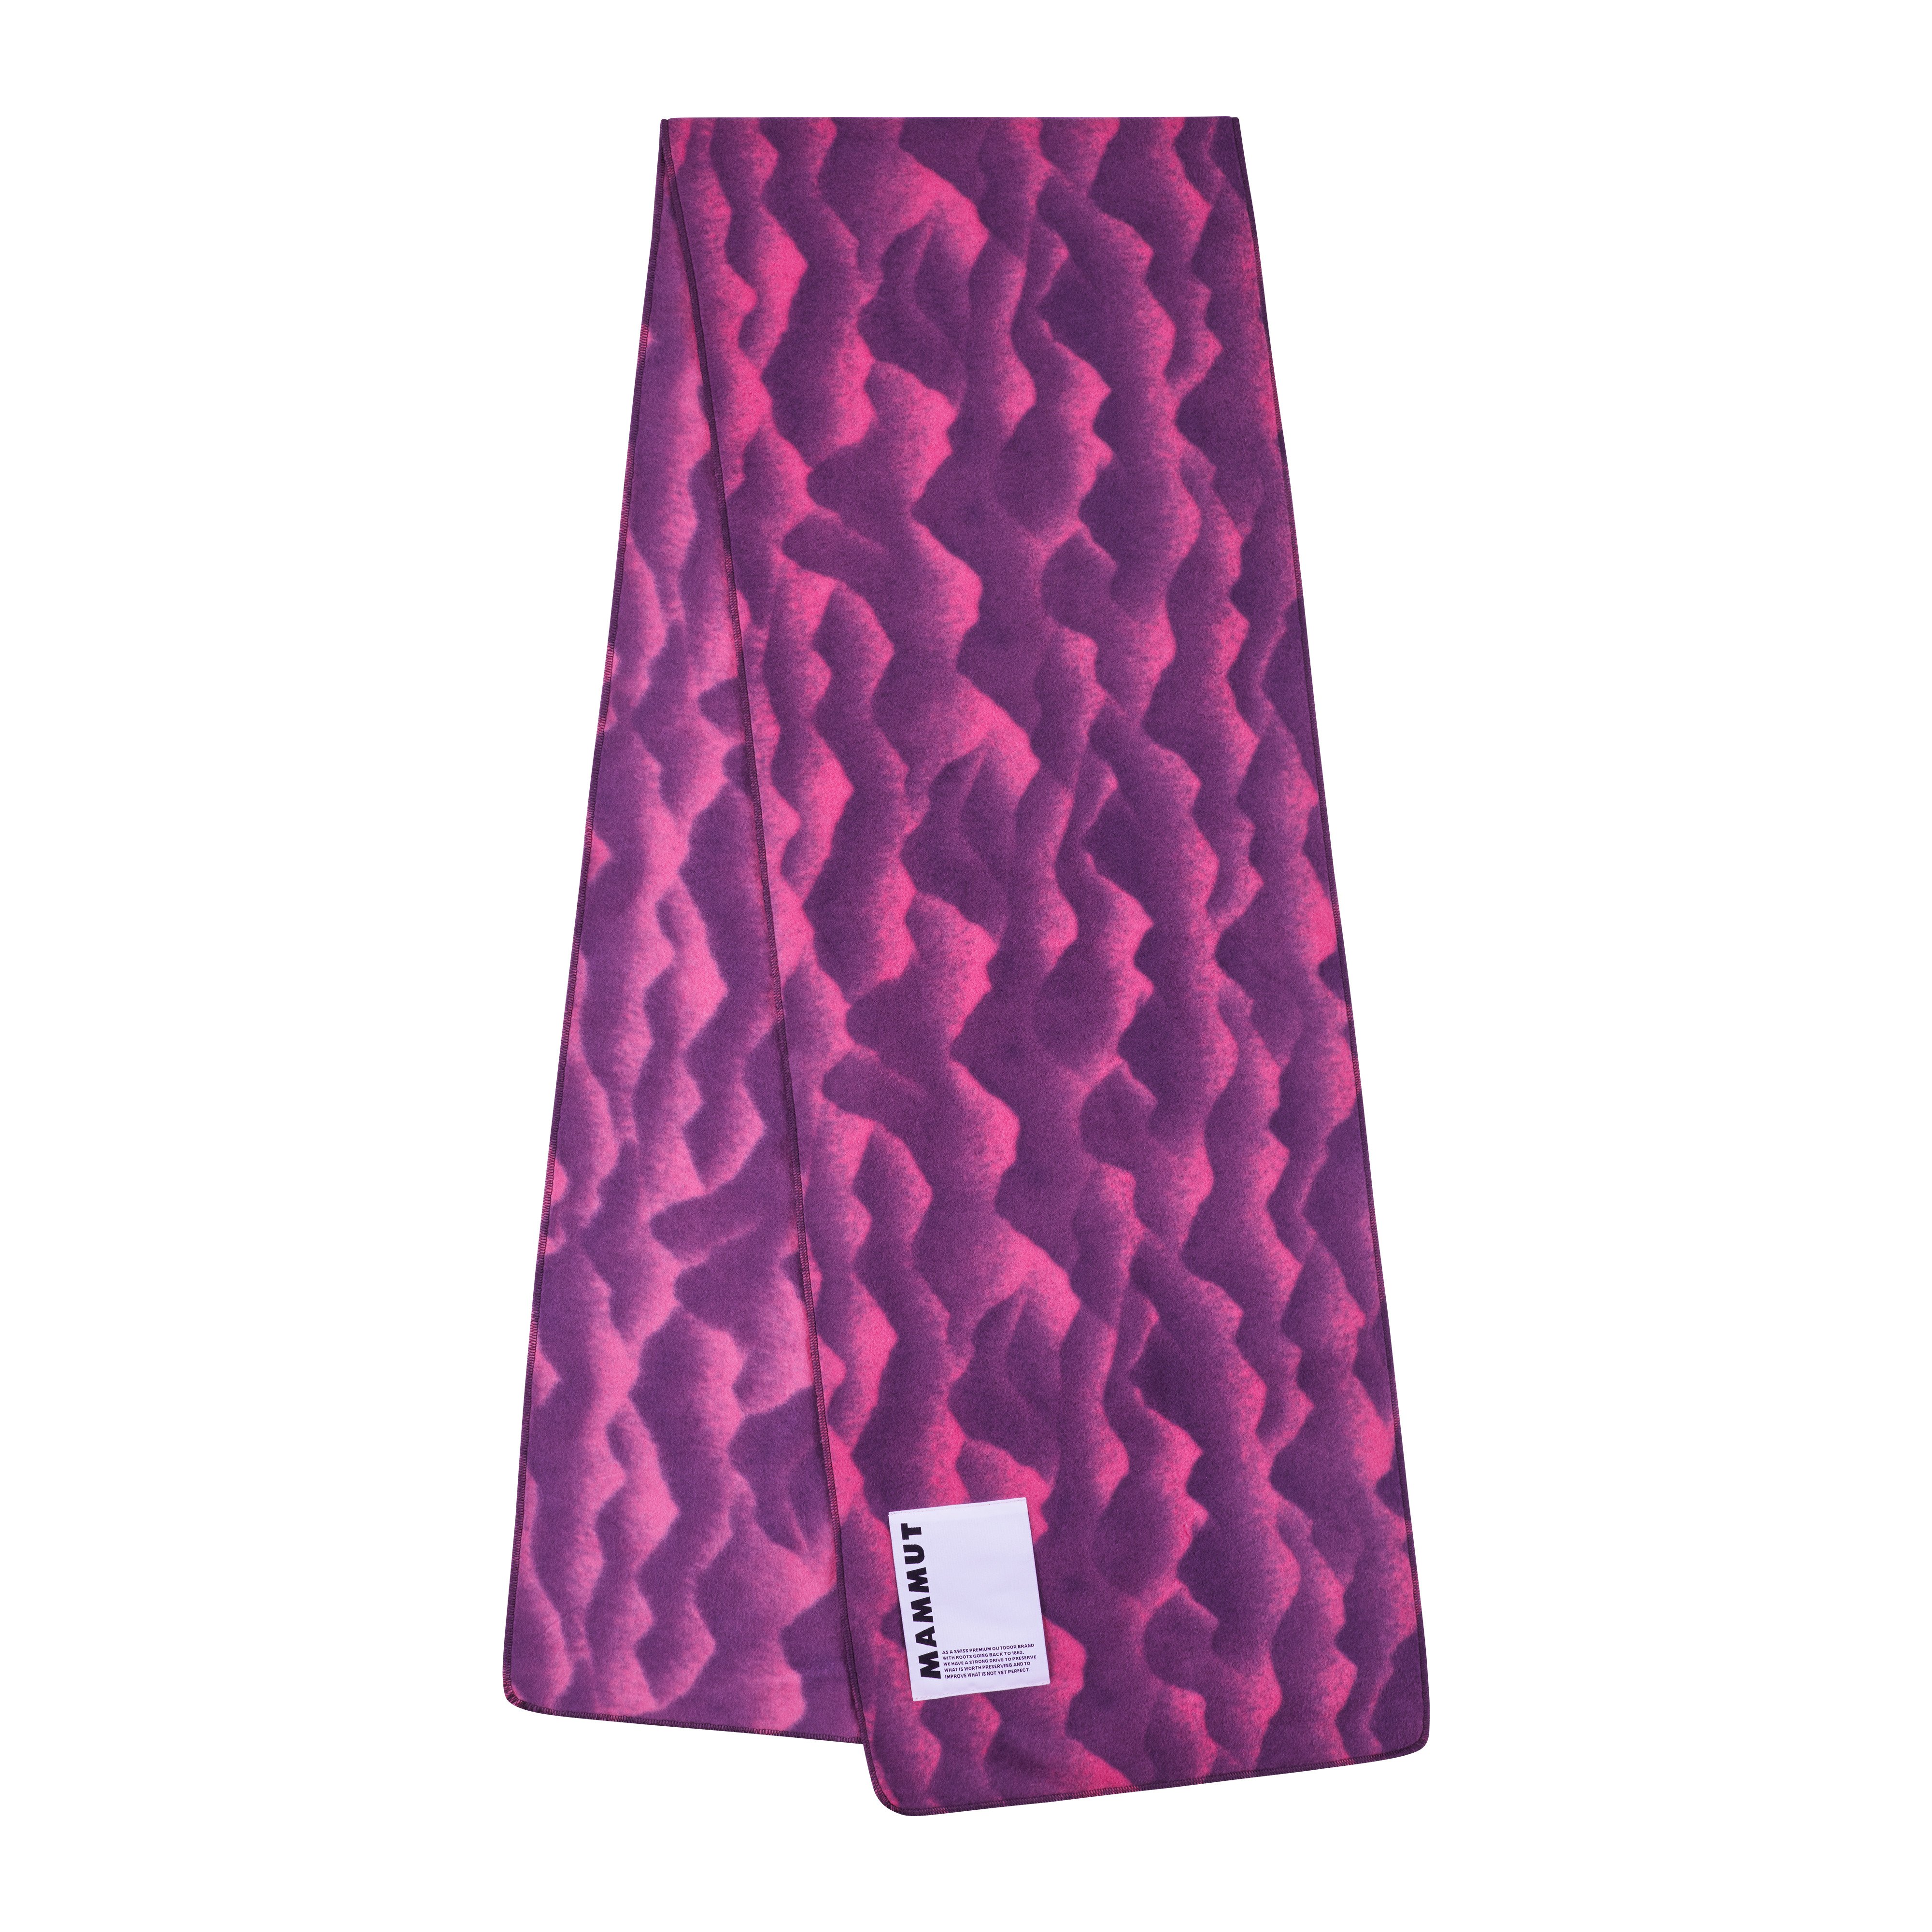 Fleece Scarf Mountains - pink-grape, one size product image